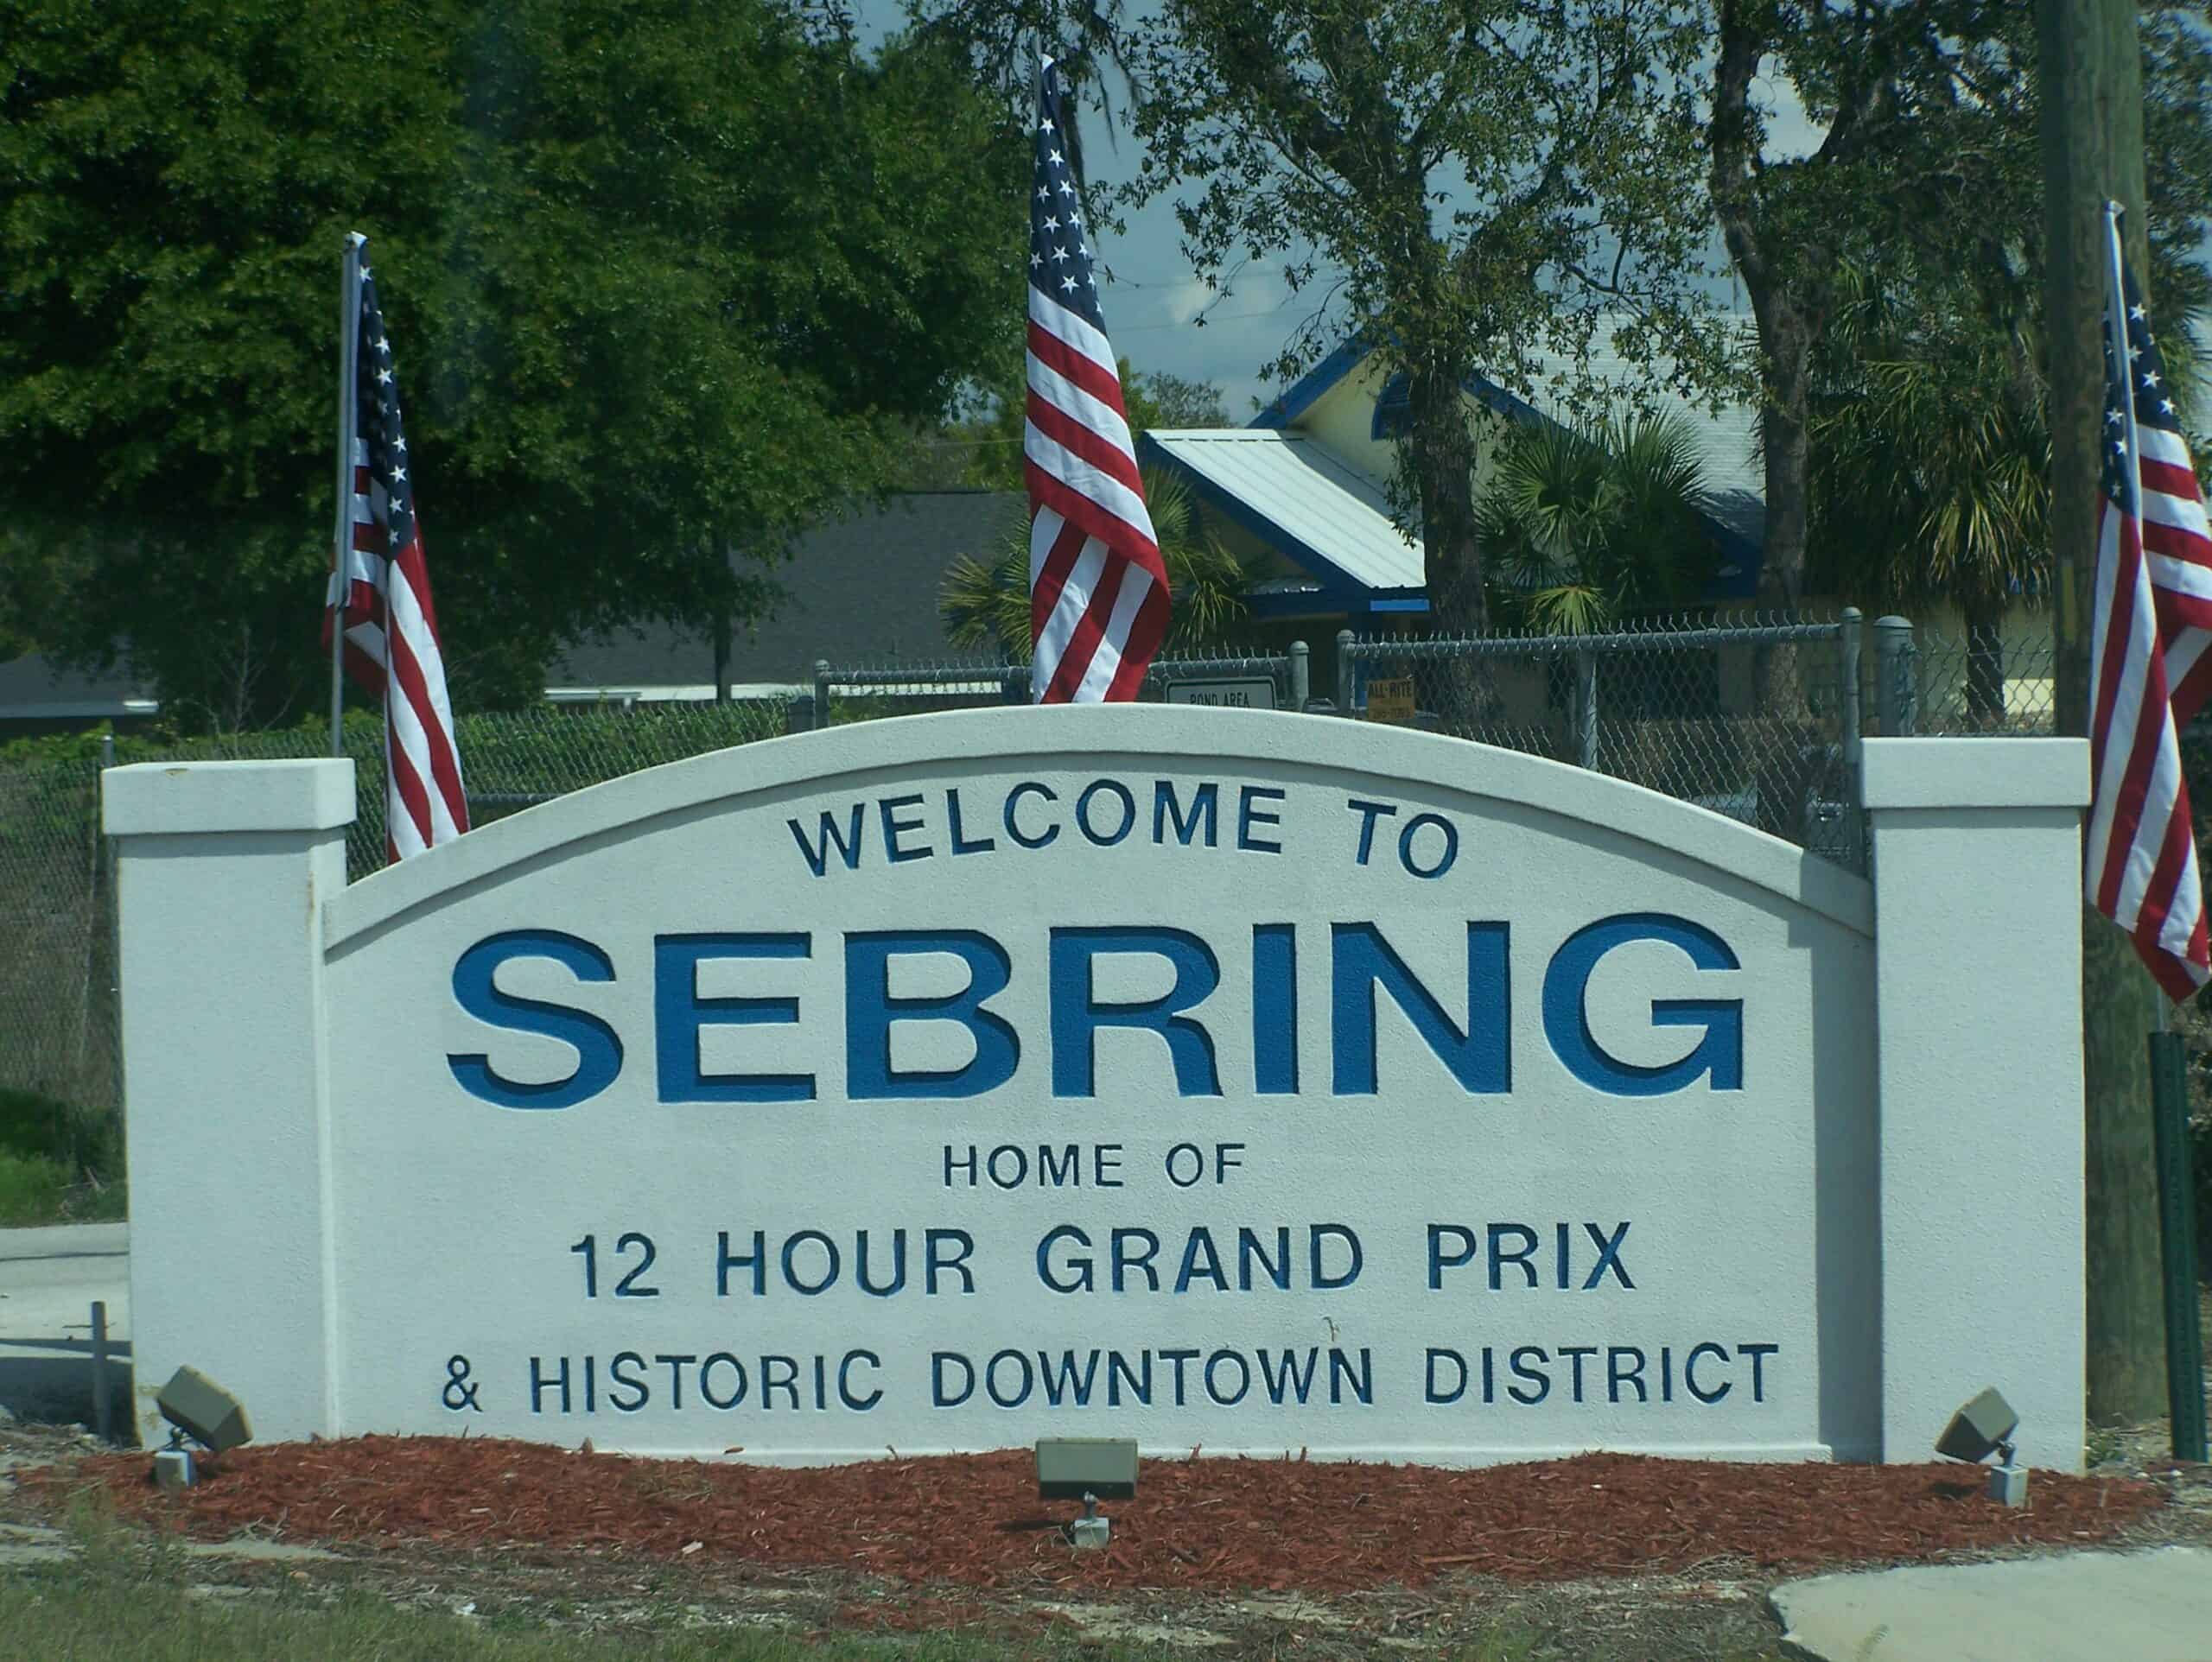 Welcome to Sebring, Florida by Chuck Schultz from Anniston, AL, USA, upload by Herrick